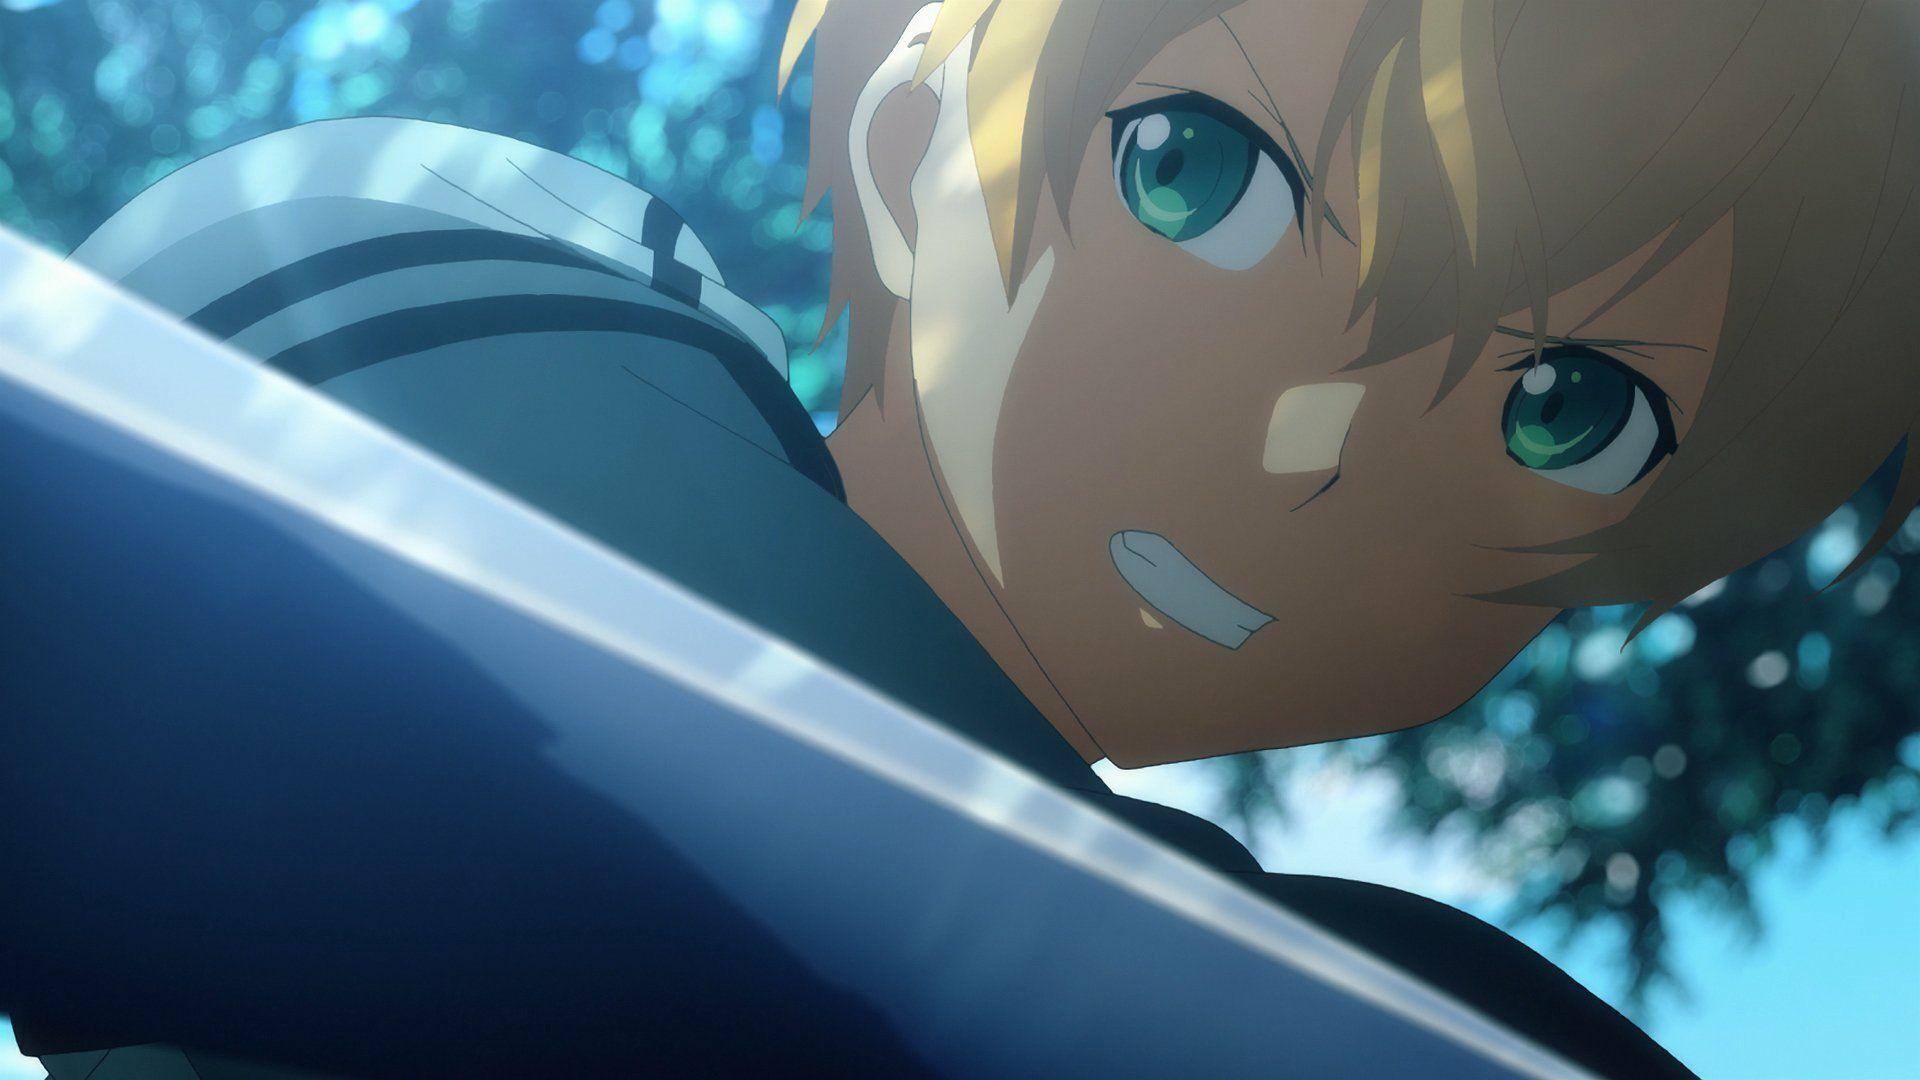 Sword Art Online: Alicization Episode 3 Synopsis and Preview Image